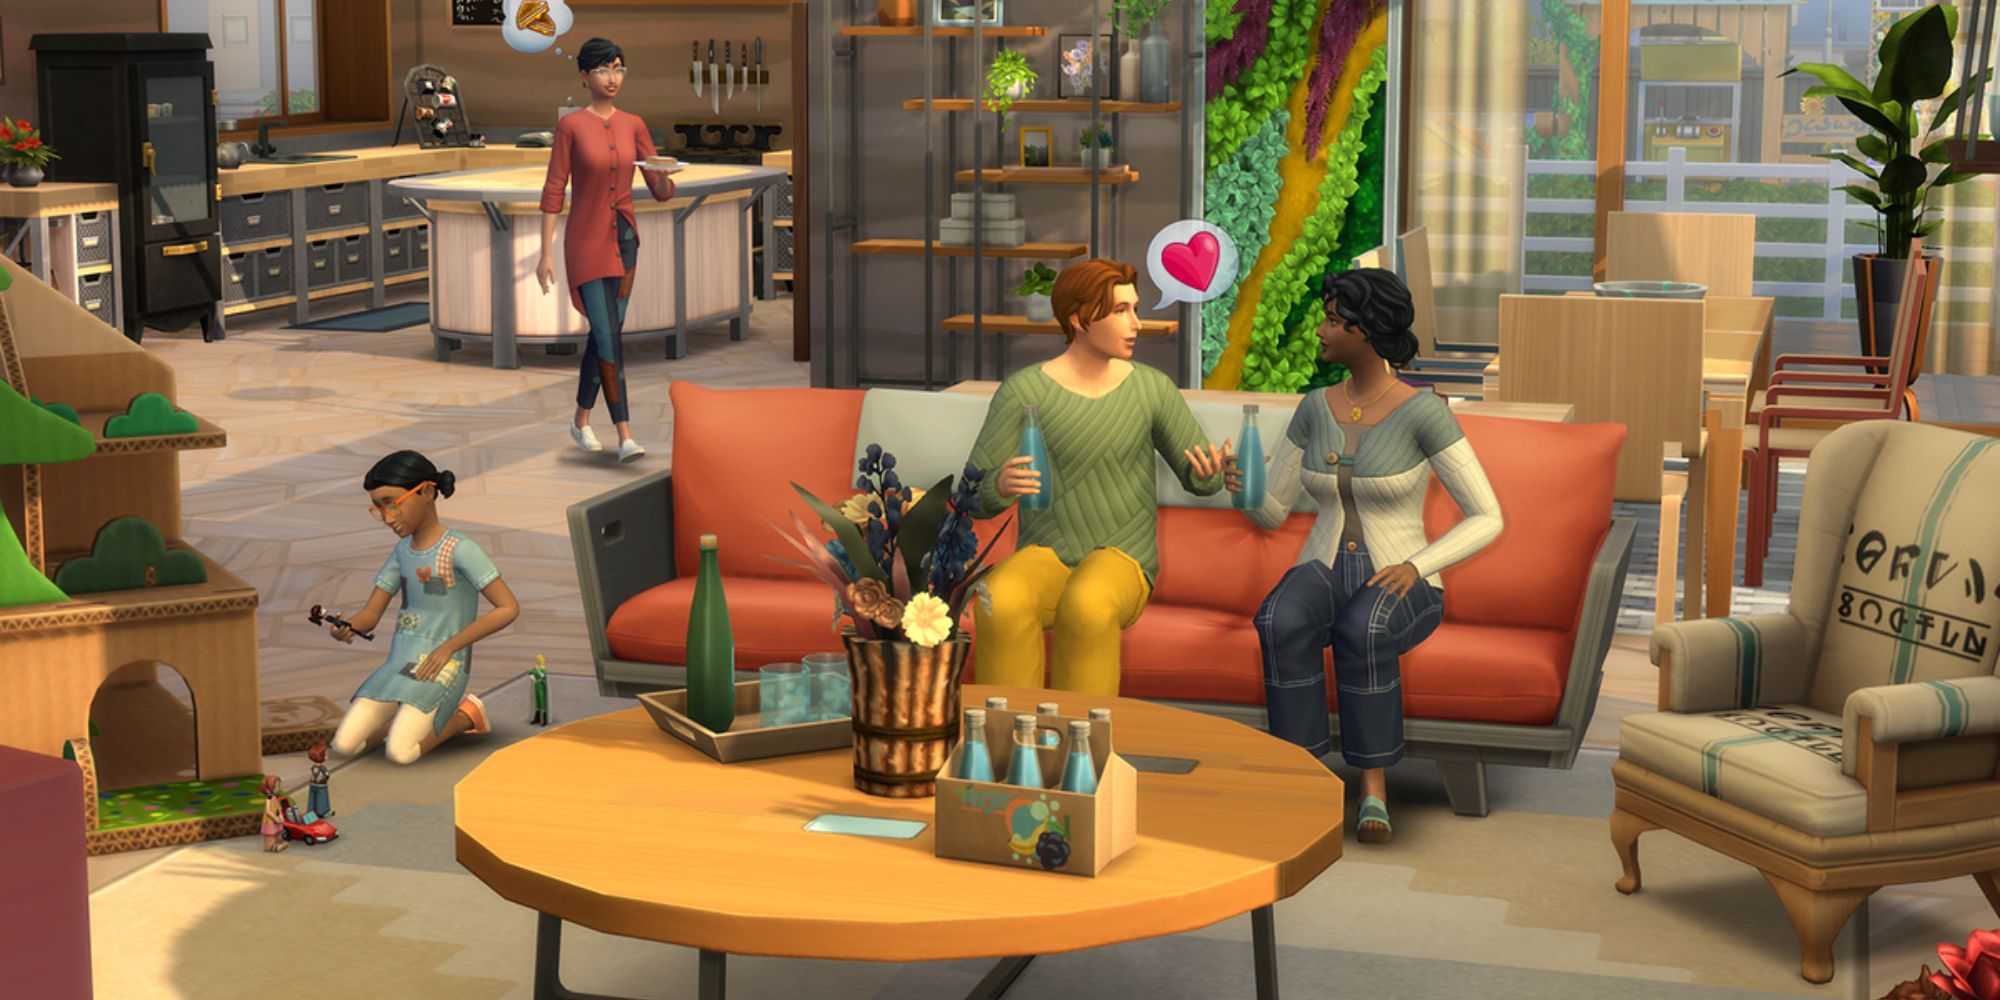 Sims socializing in a house in The Sims 4